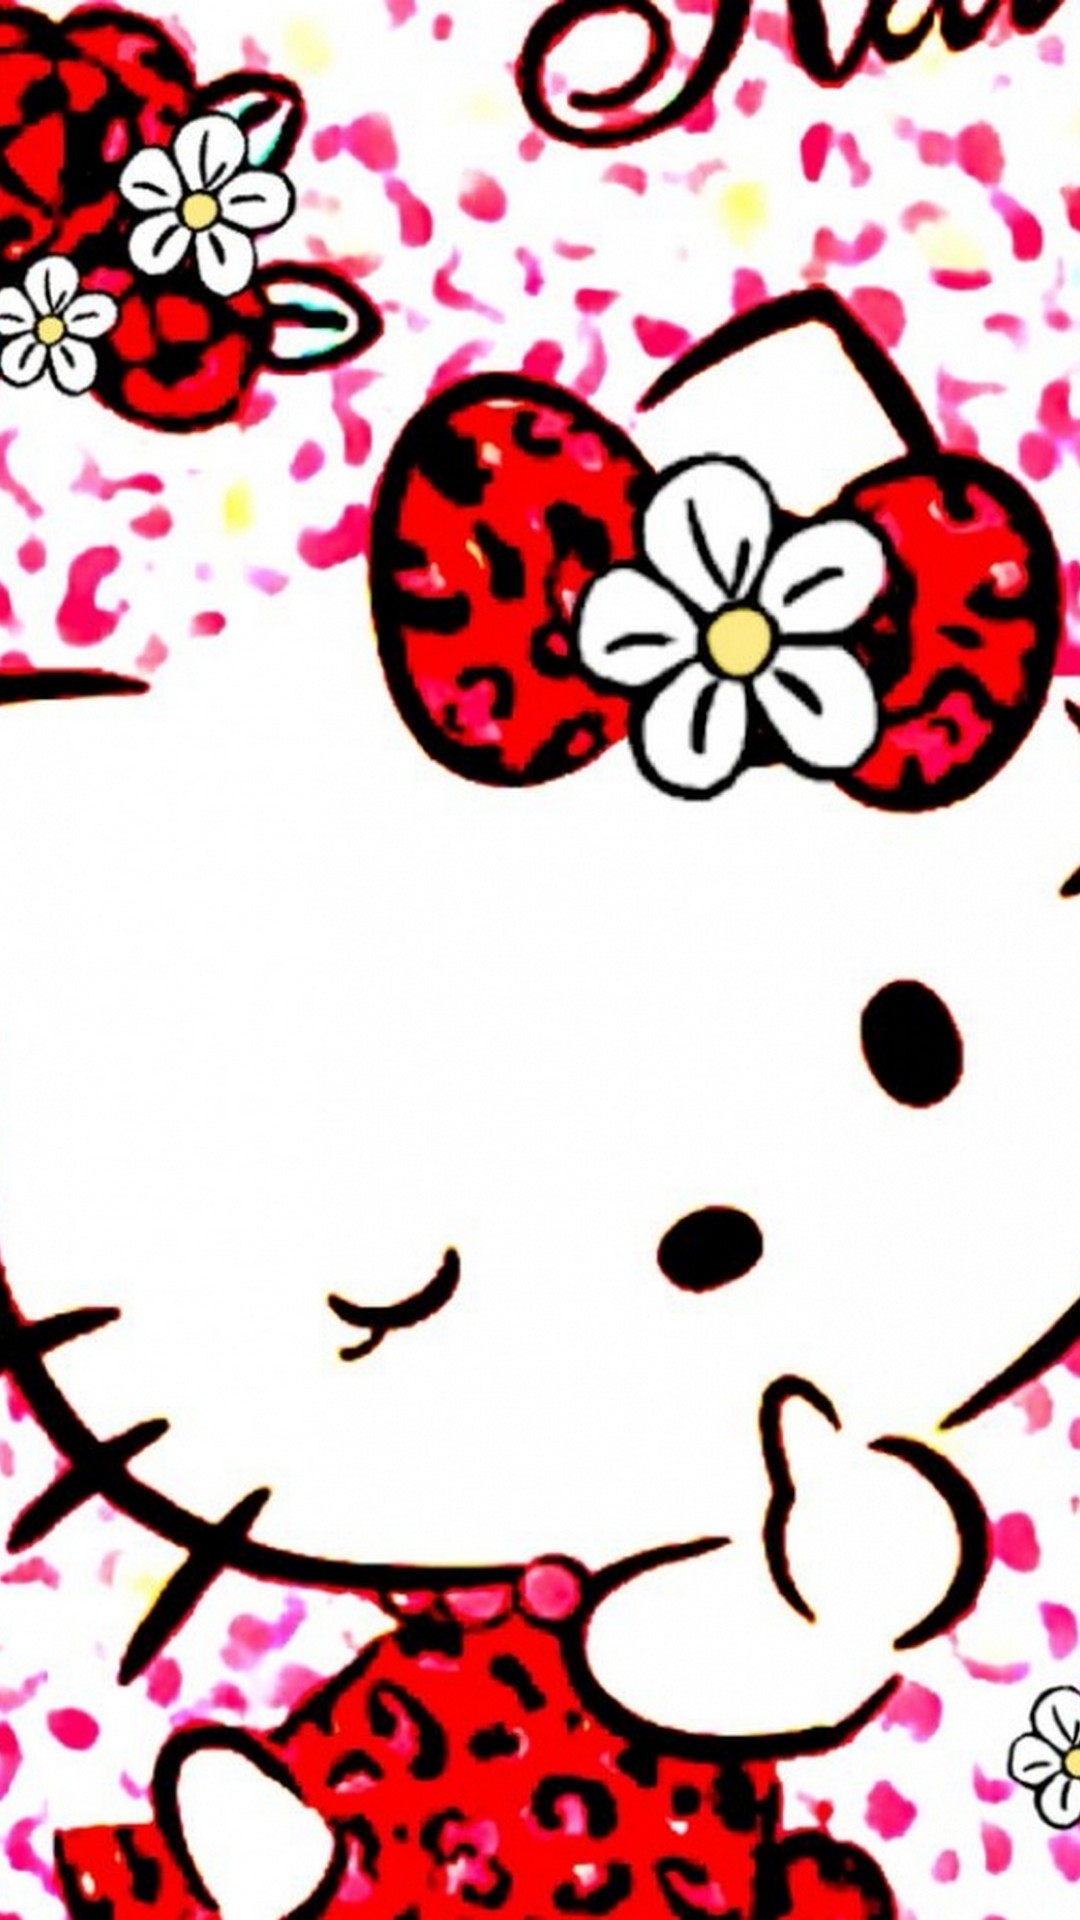 Wallpaper Hello Kitty Images iPhone with resolution 1080X1920 pixel. You can make this wallpaper for your iPhone 5, 6, 7, 8, X backgrounds, Mobile Screensaver, or iPad Lock Screen